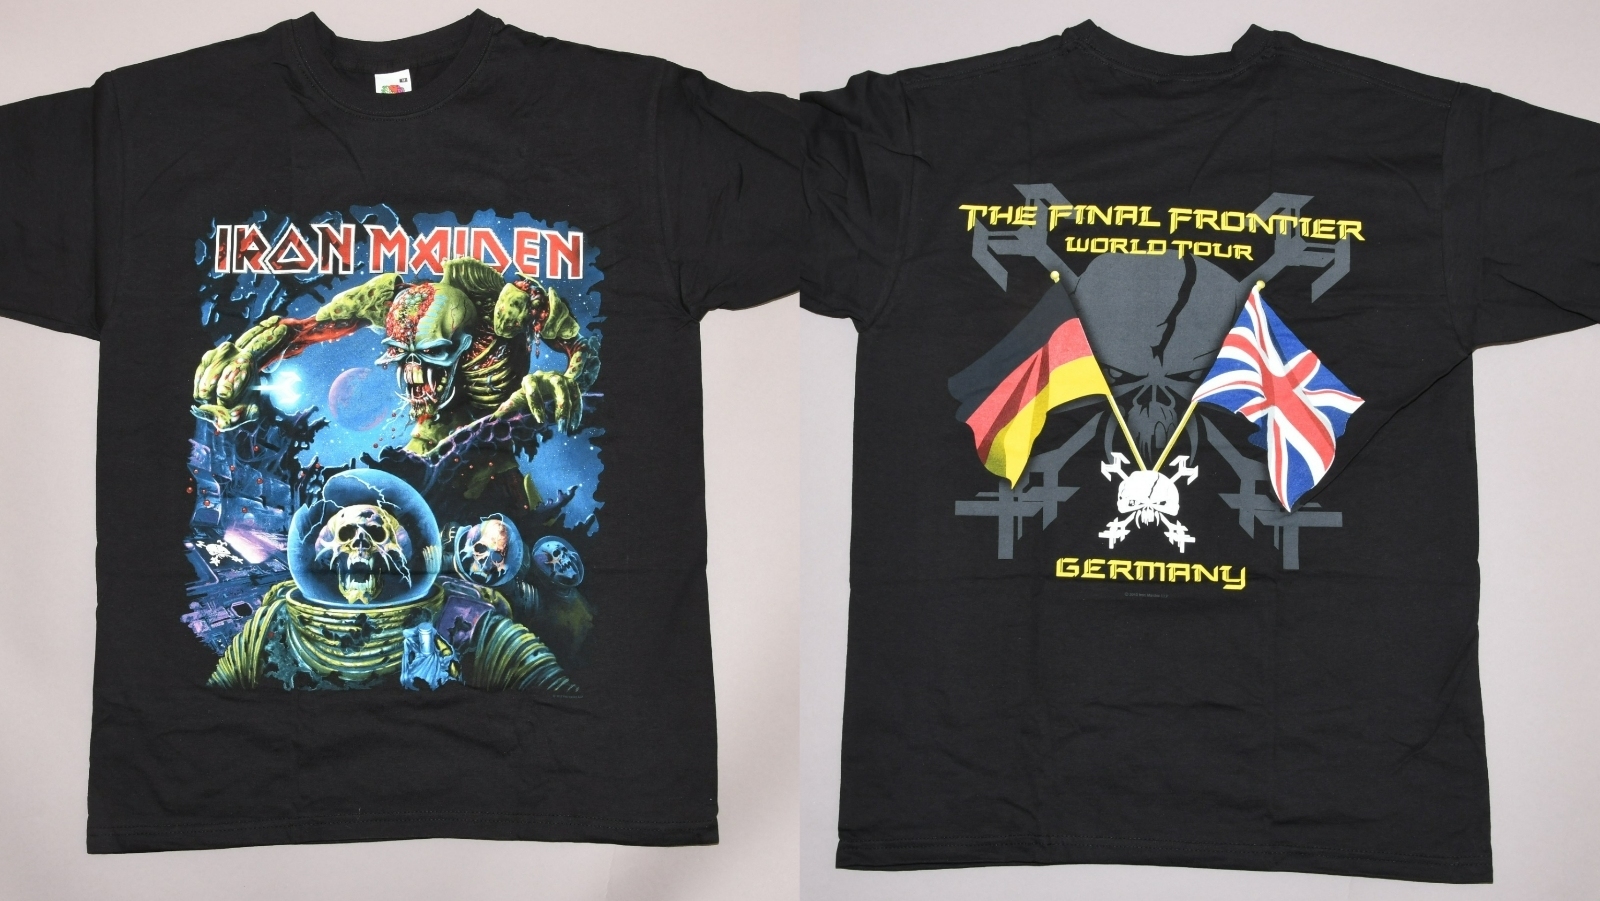 Last year, police issued a fresh appeal to trace a man wearing an Iron Maiden t-shirt who officers believe may be able to help the investigation.